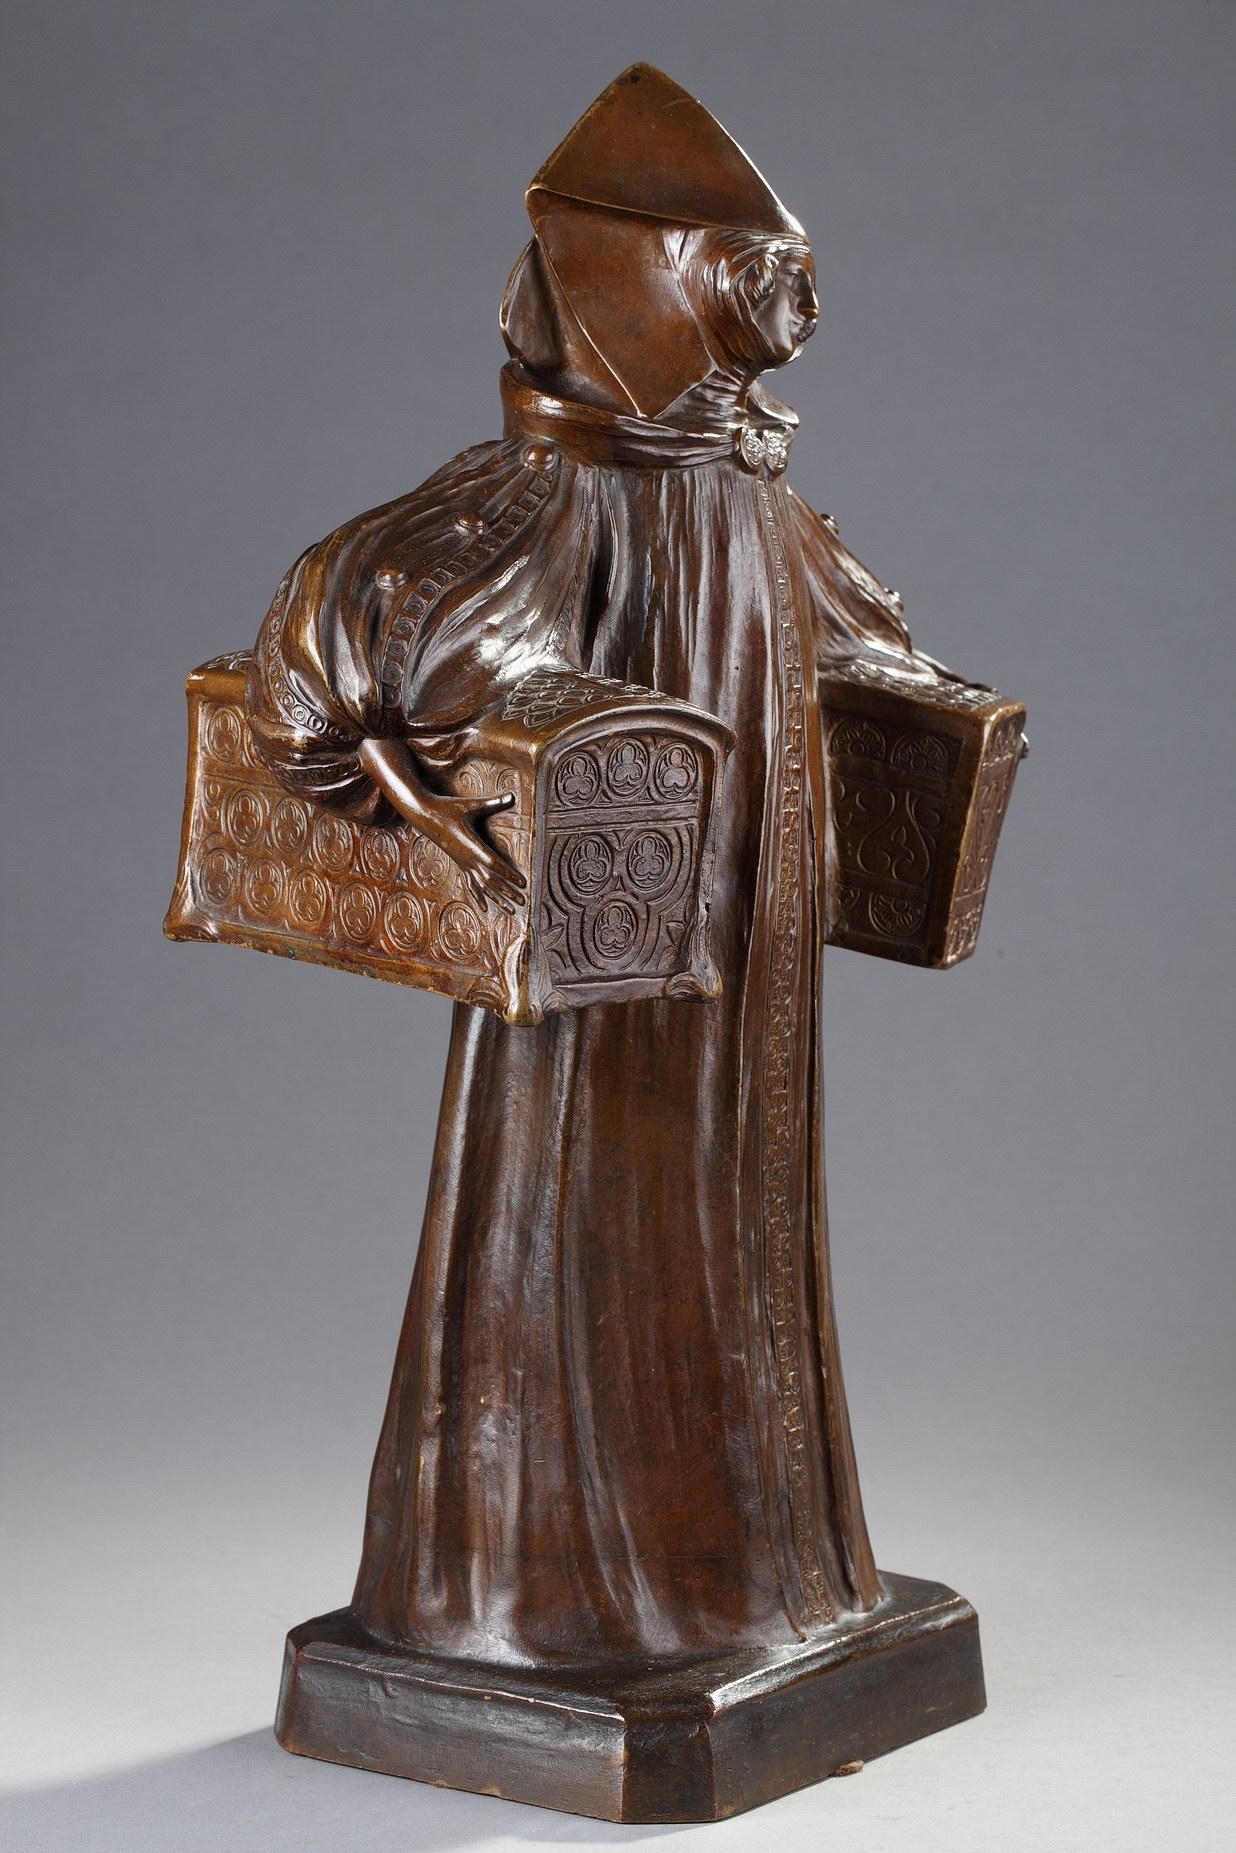 Lady with caskets
by Léo LAPORTE-BLAIRSY (1865-1923)

Bronze a nuanced brown patina
signed on the side of the base 